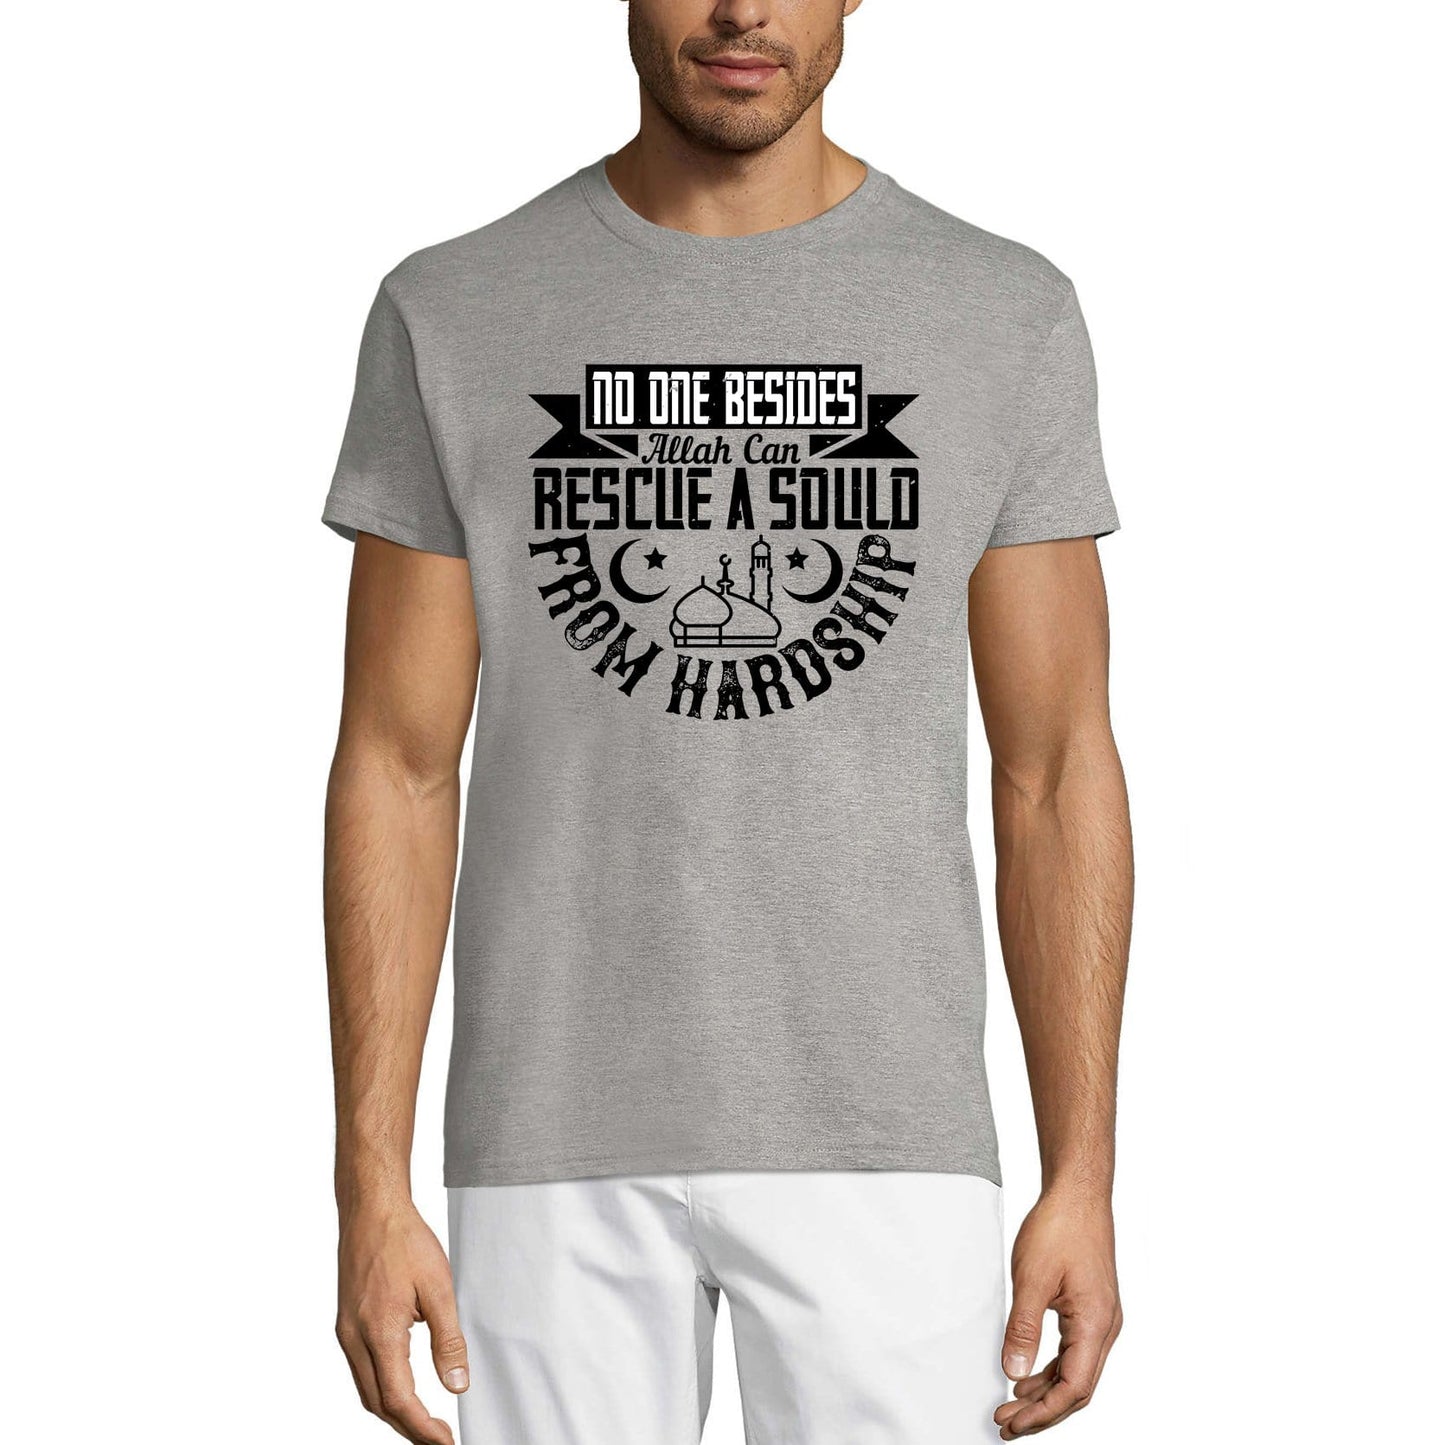 ULTRABASIC Men's T-Shirt No One Besides Allah Can Rescue a Sould from Hardship - Muslim Tee Shirt